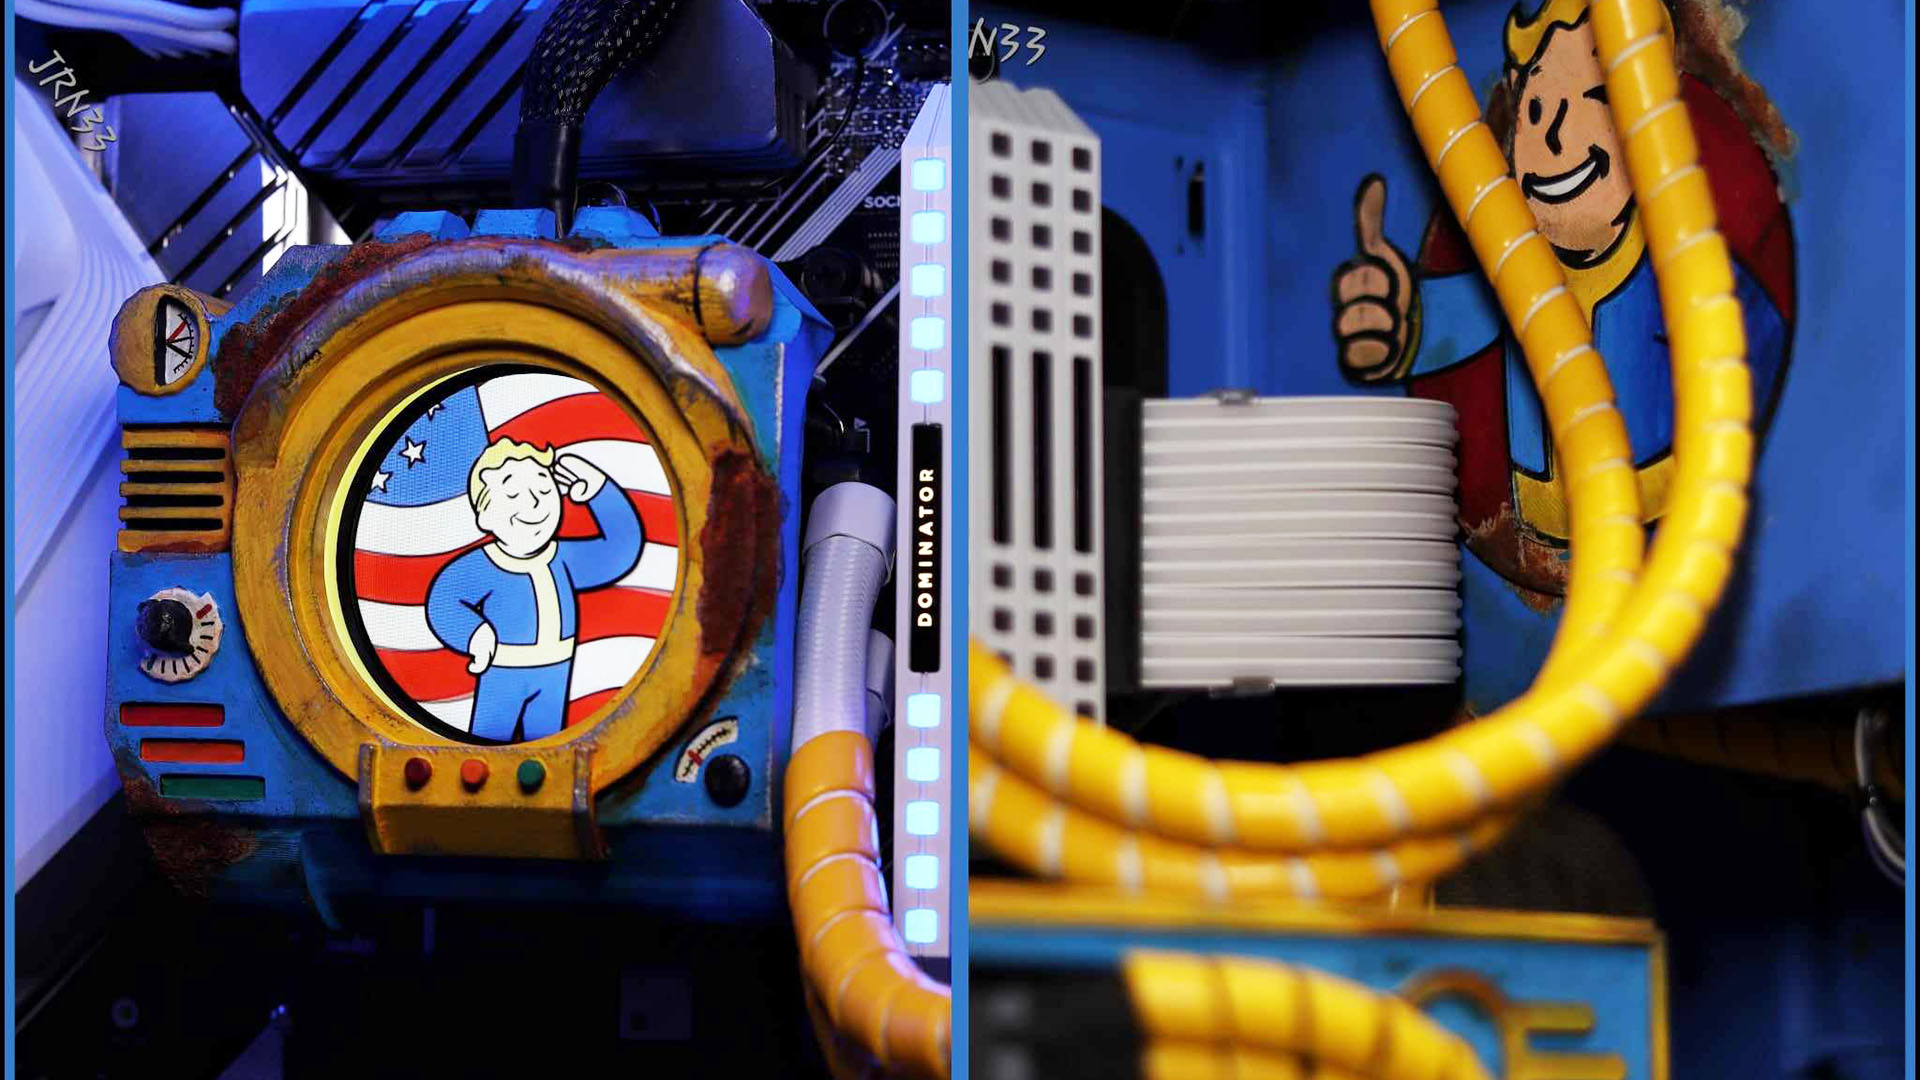 Fallout gaming PC build: Pip Boy AIO cooler surround and Vault Boy screen